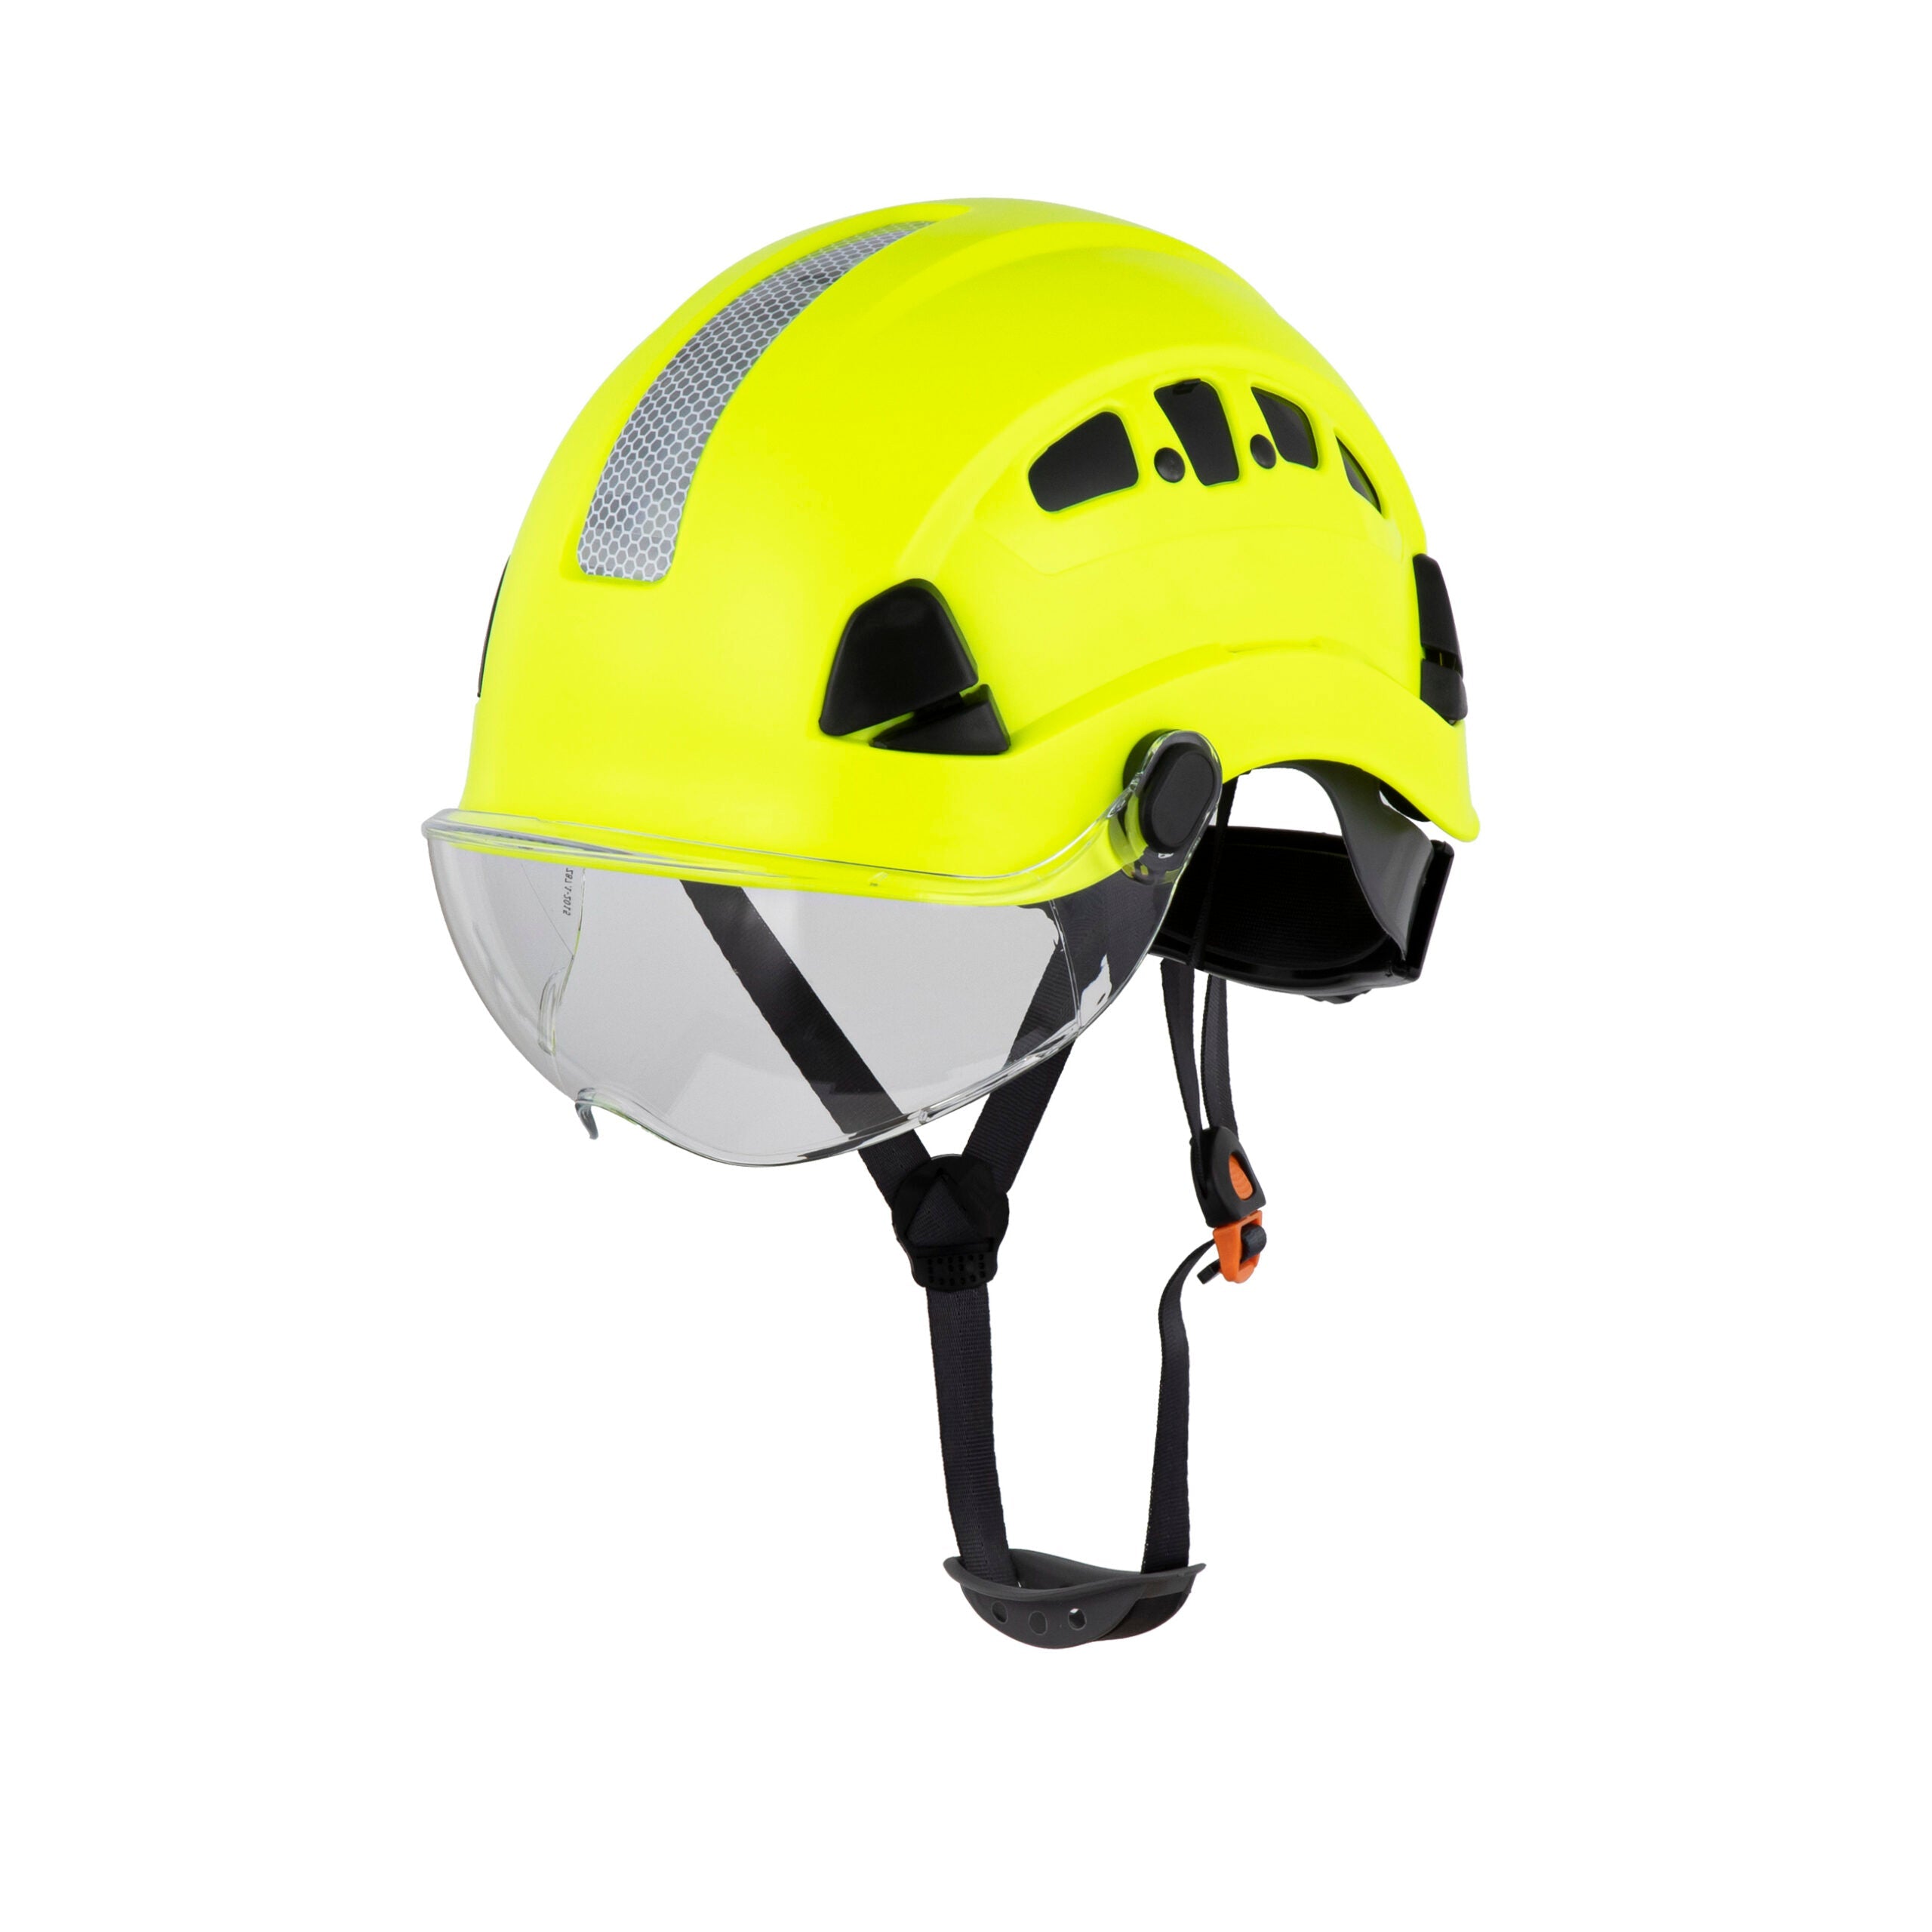 H1-CH Safety Helmet With Visor, Type 1 Class C, ANSI Z89.1 - Defender Safety